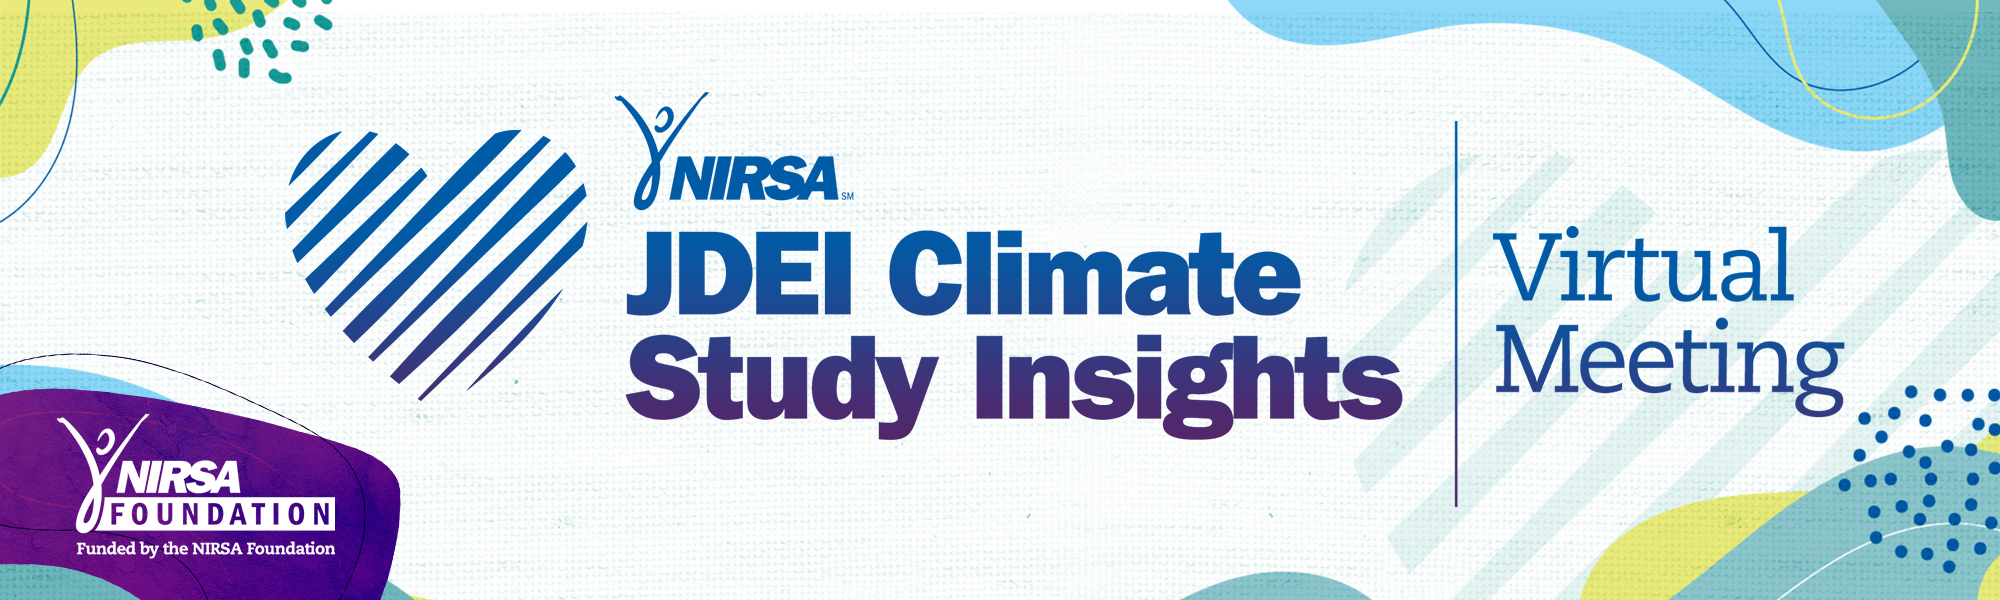 JDEI Climate Study Insights